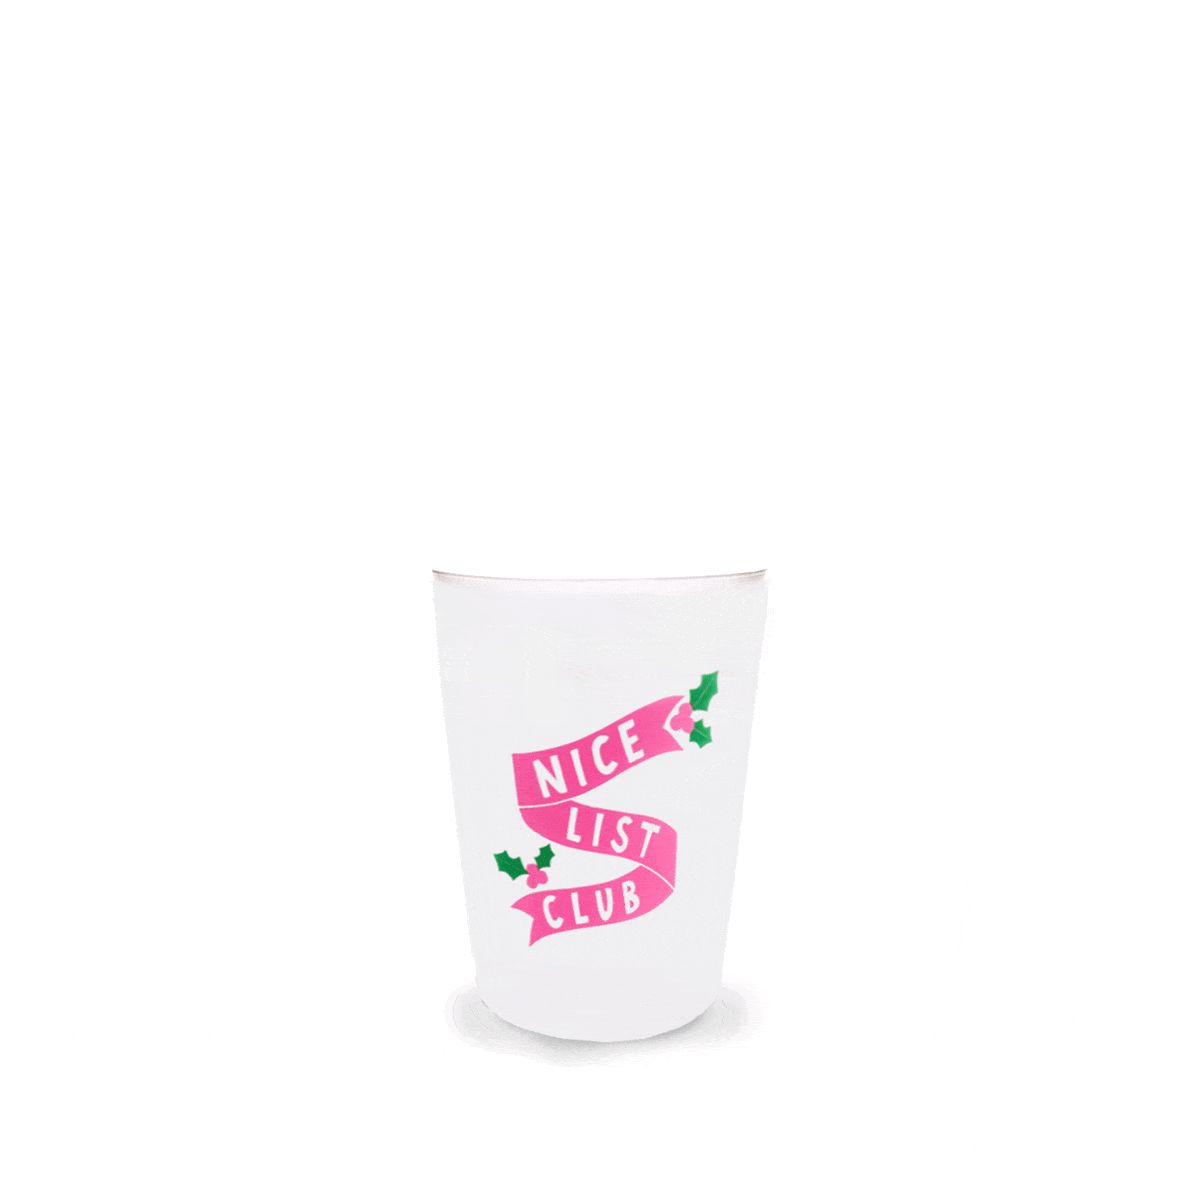 Nice List Club Reusable Cupstack Set | Packed Party